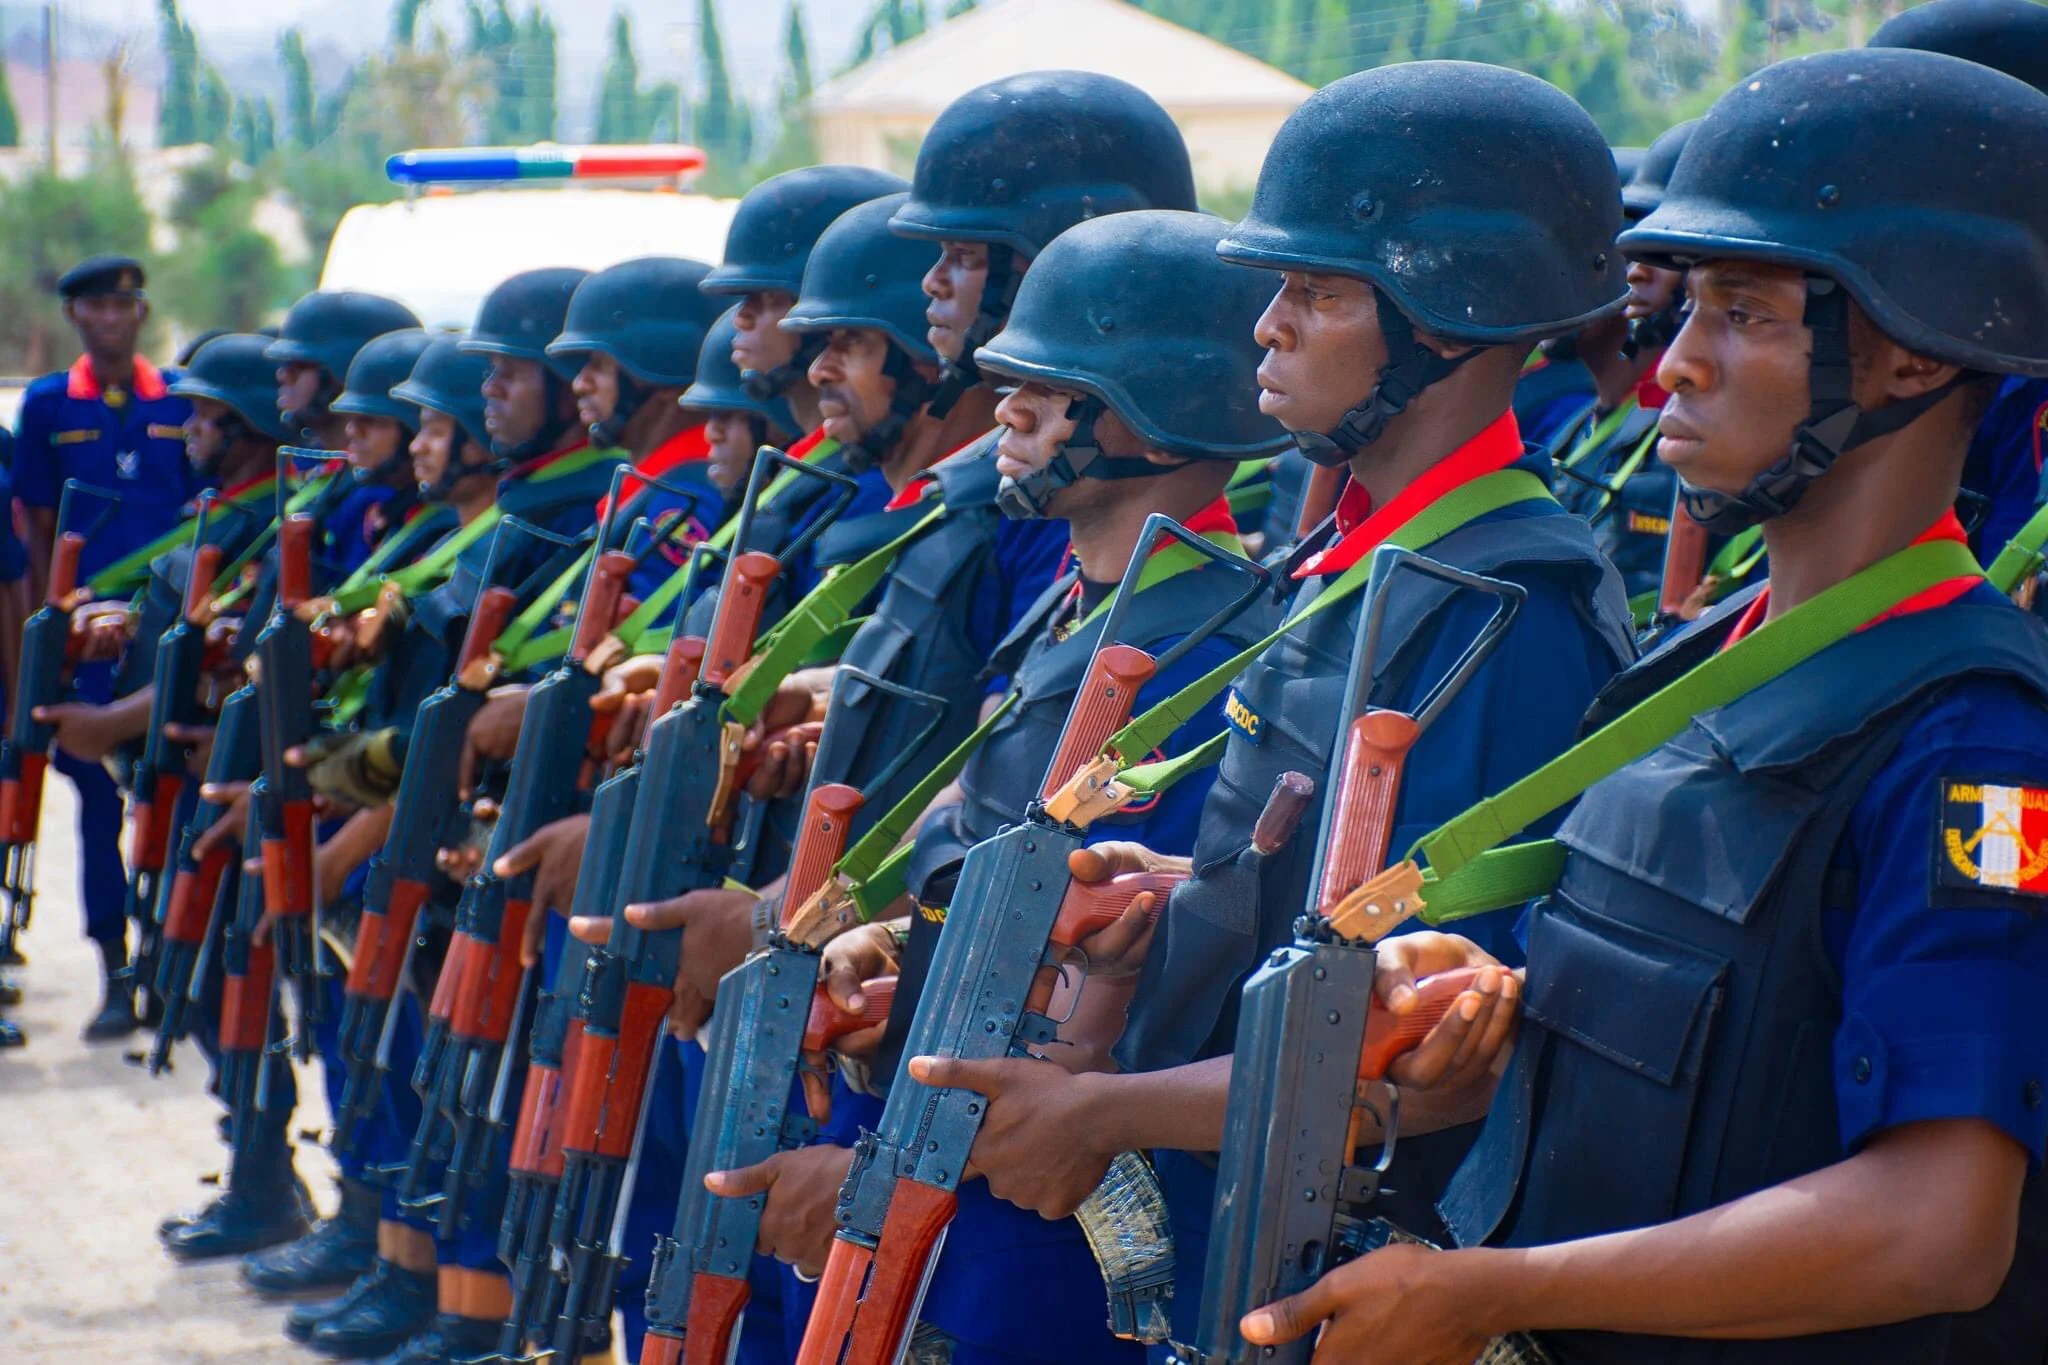 NSCDC Saves 10 Suspected Human Trafficking Victims in Abuja